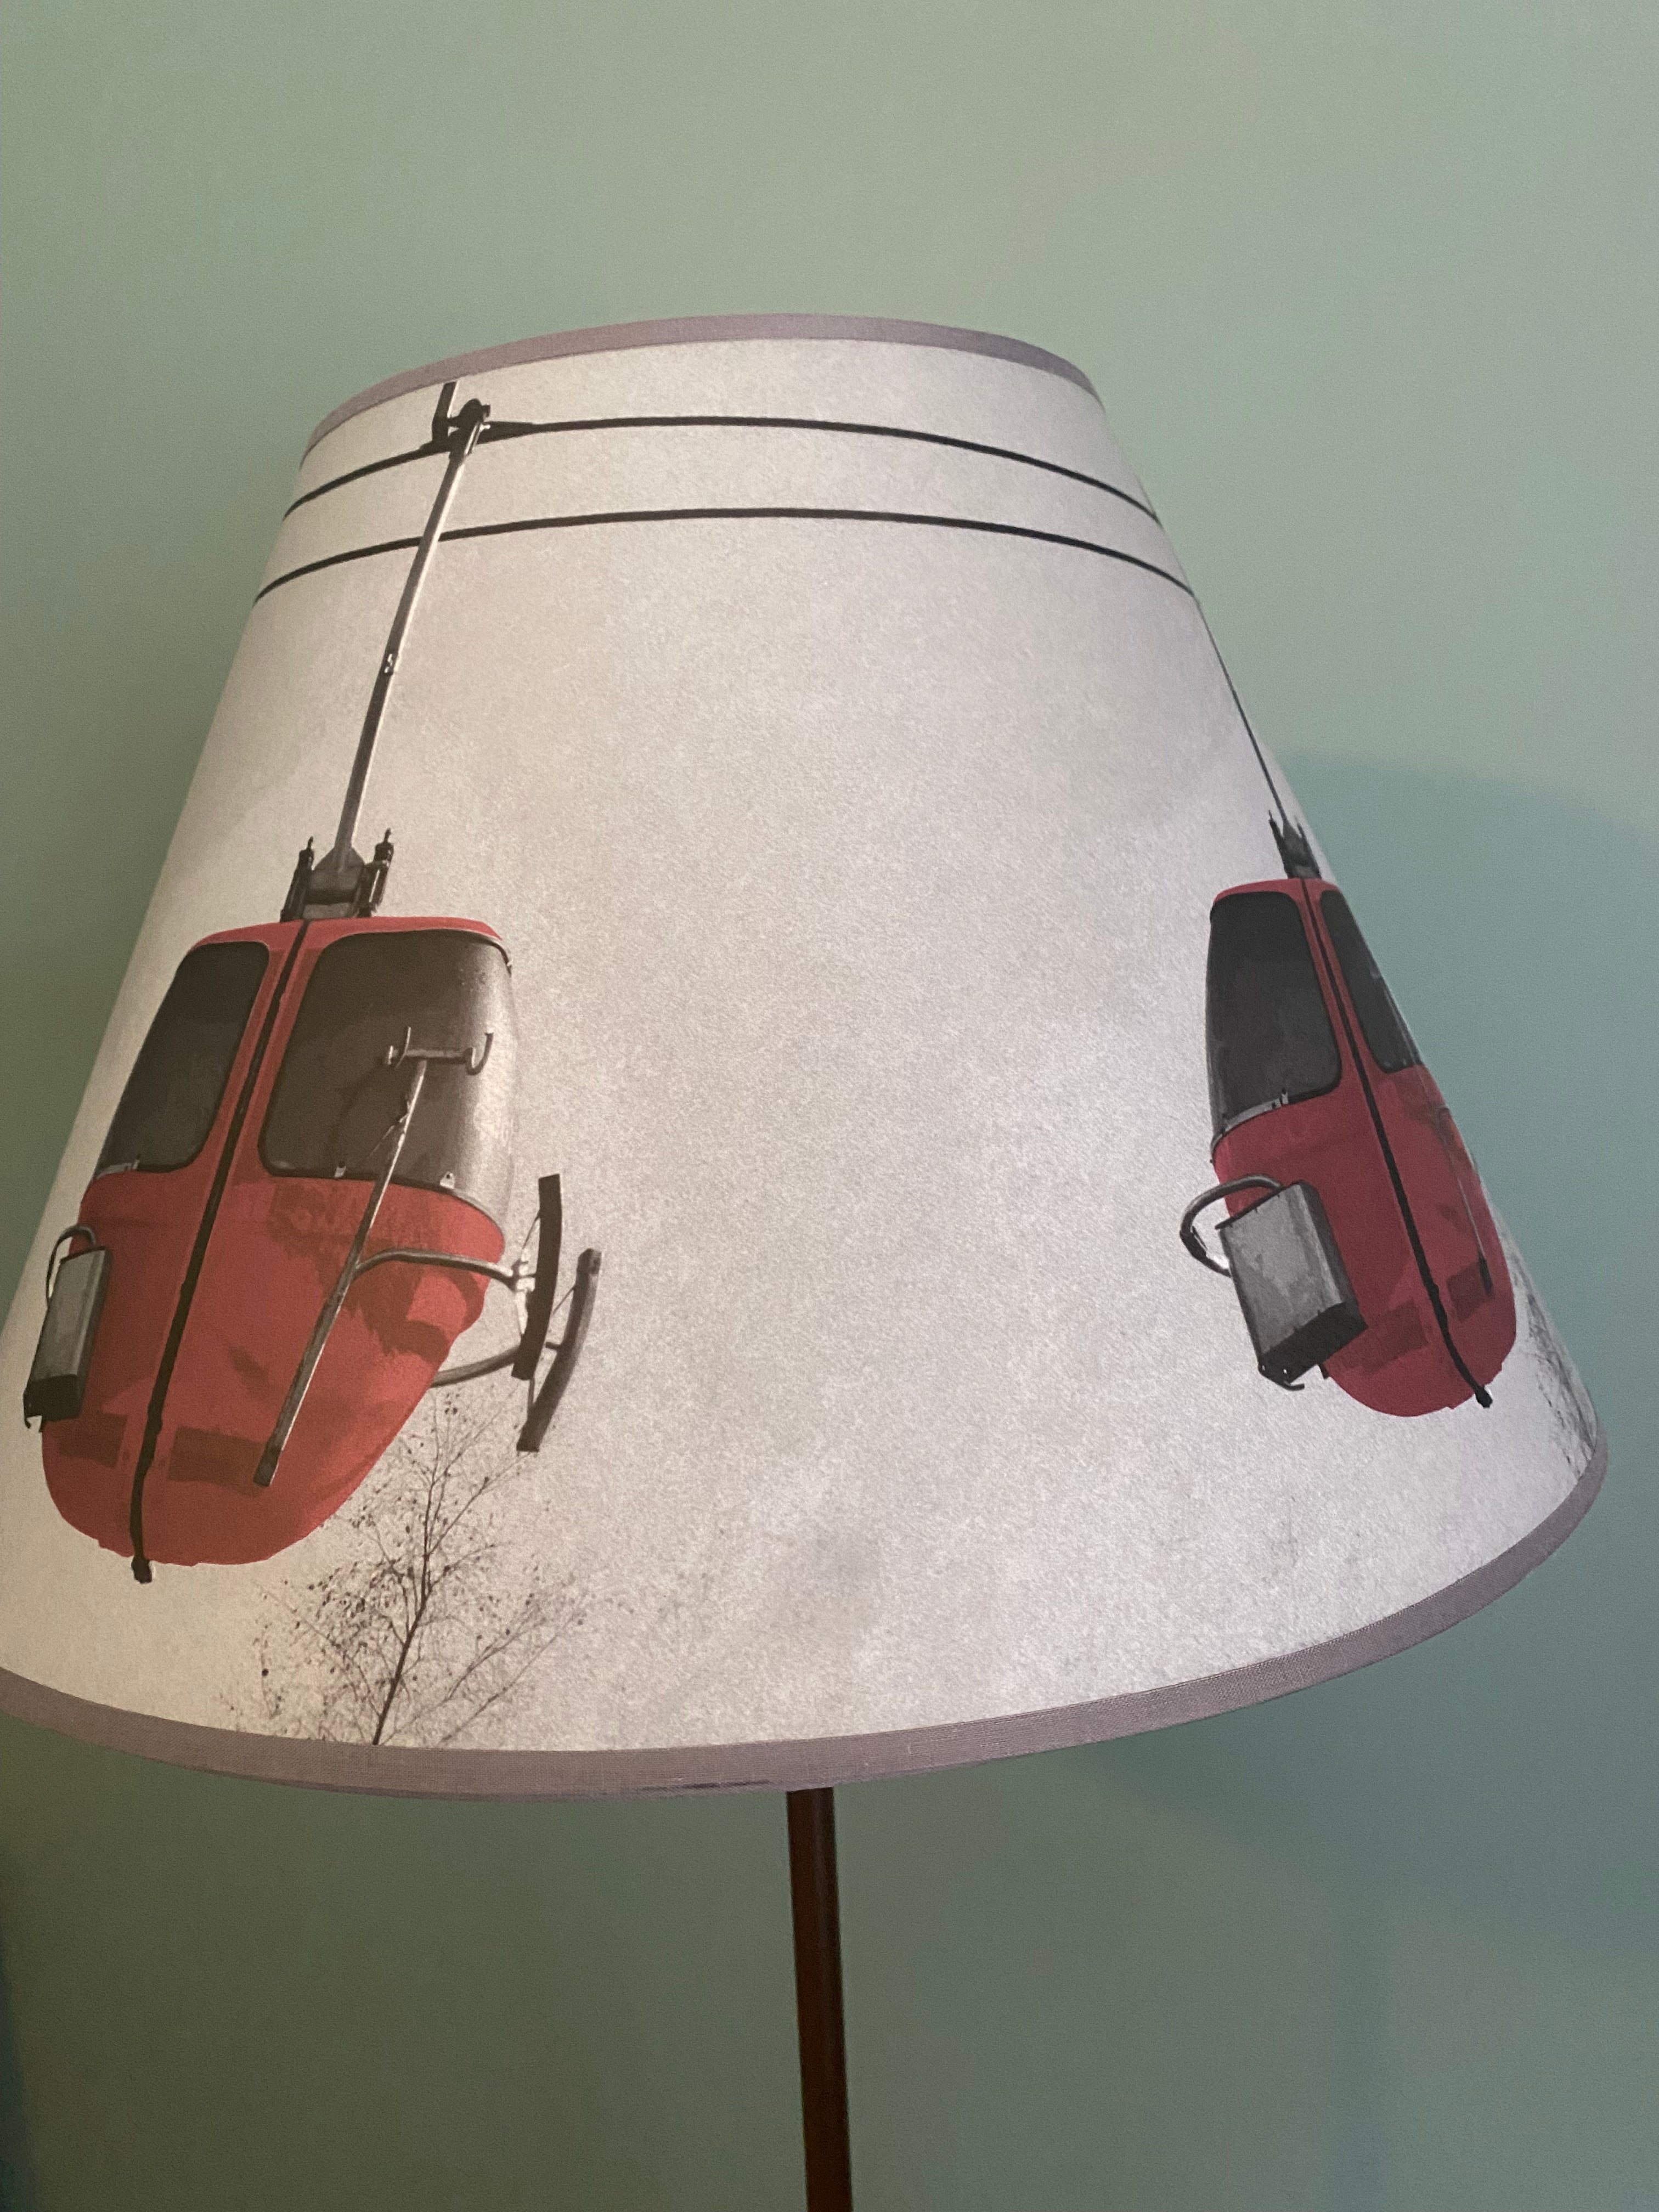 Photo of a floor lamp with a brown metal rod, topped by a vintage photo printed canvas lamp shade. The colour photo shows 3 red egg gondolas in the air with tree tops and clouds in the background against a grey sky. Lamp in front of a green painted wall.